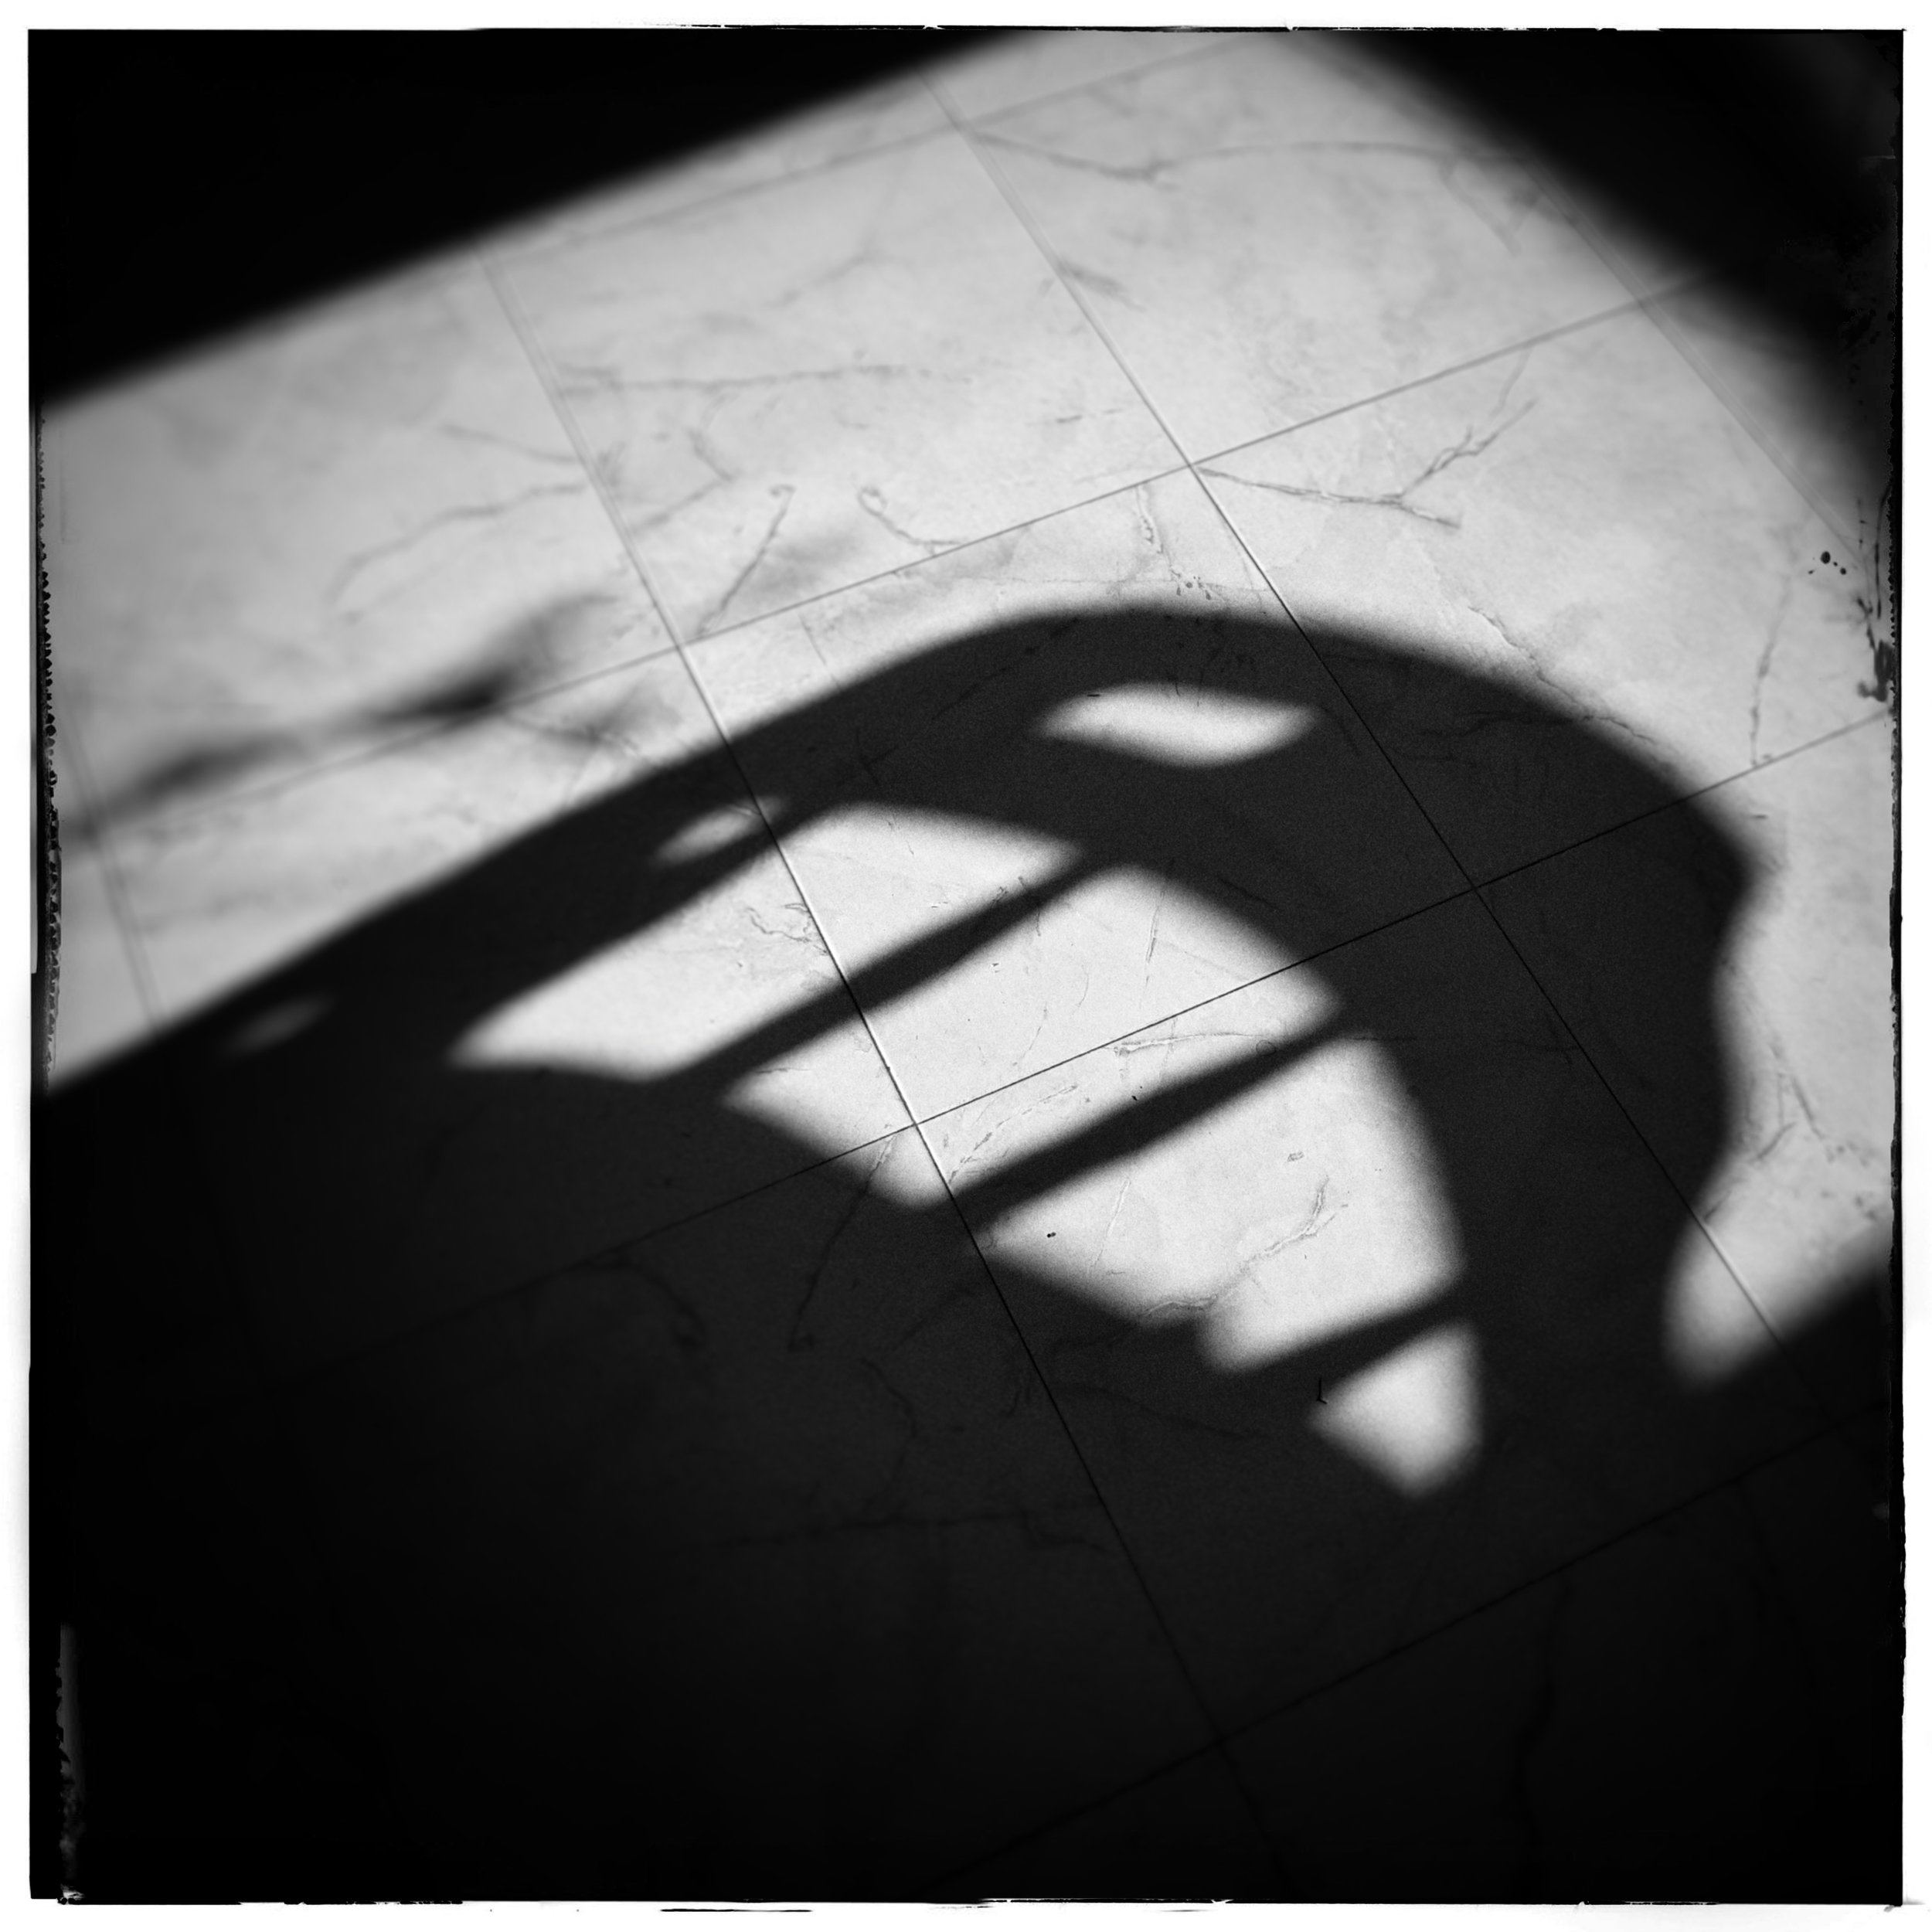 Day 194 - July 13: There's a shadow monster on the floor...